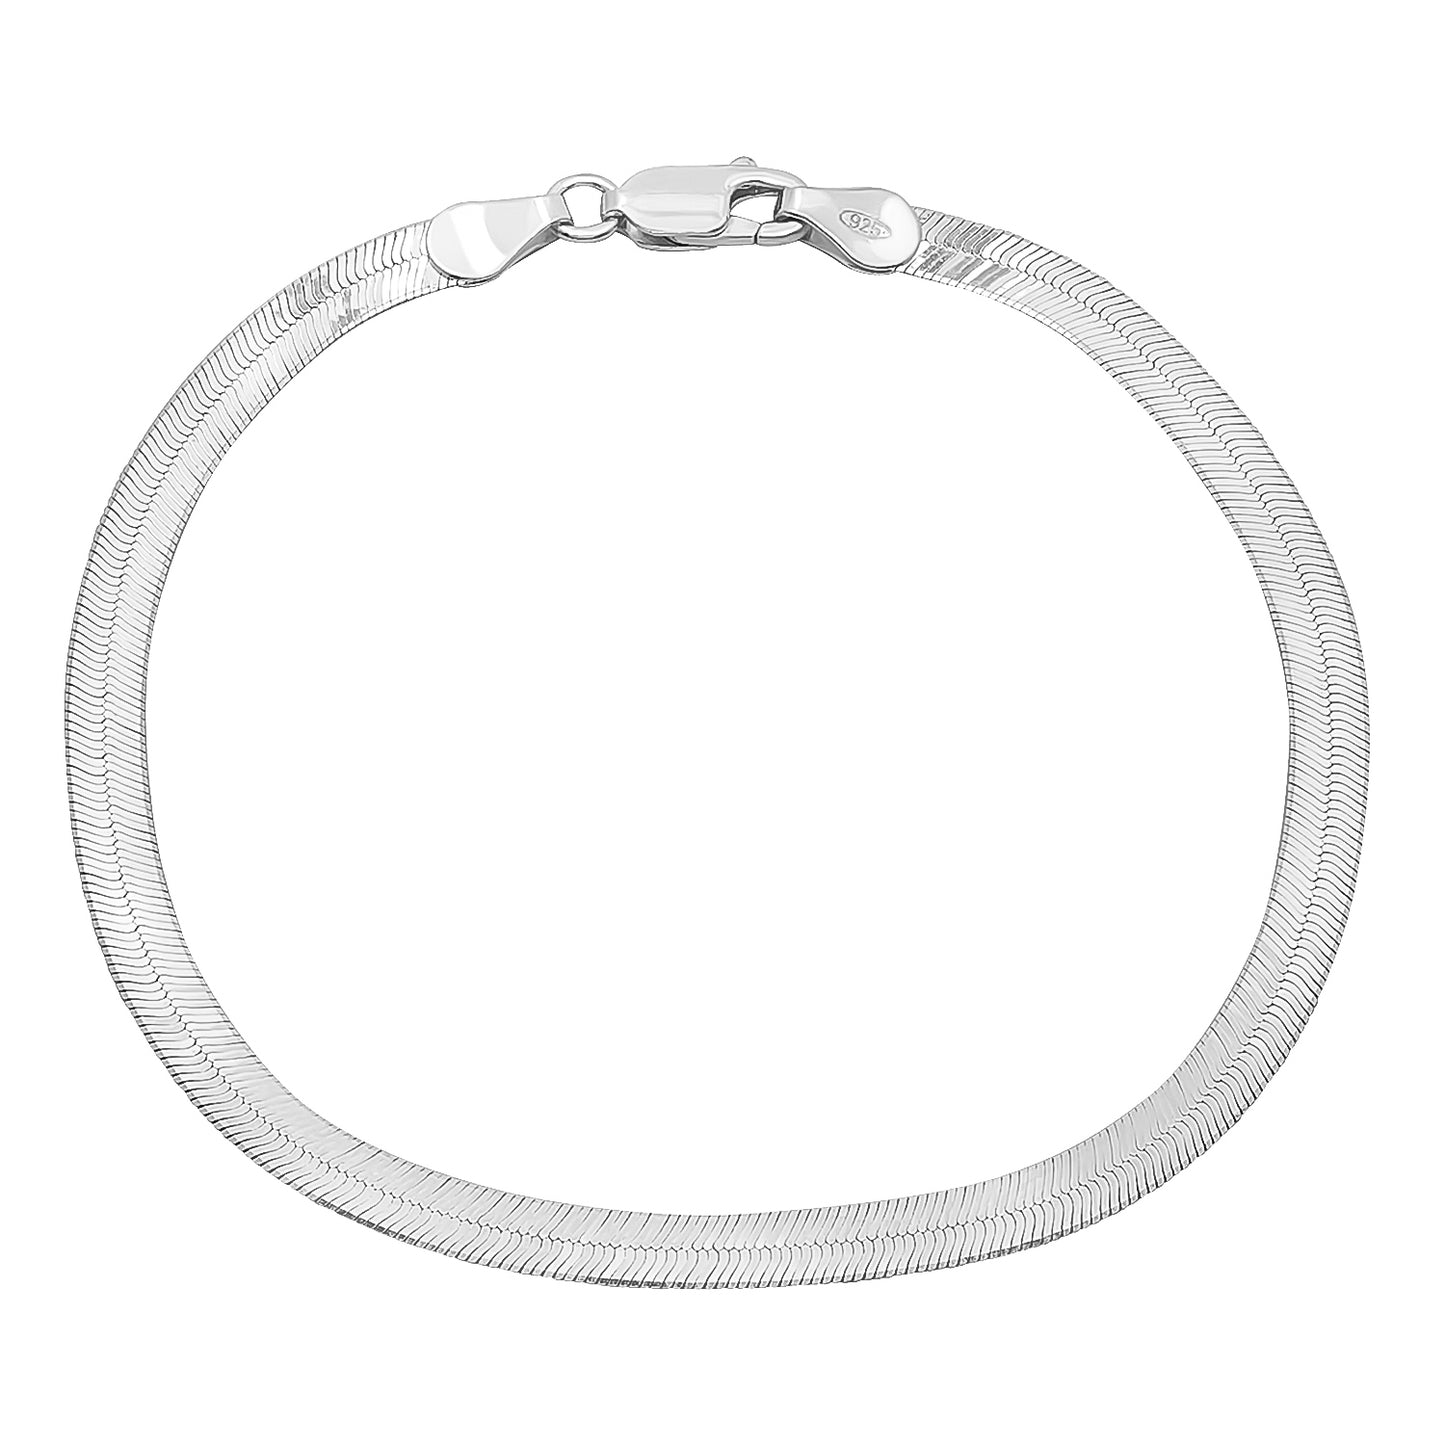 4.5mm Solid .925 Sterling Silver Flat Herringbone Chain Necklace + Gift Box (SKU: SYC080-BX)